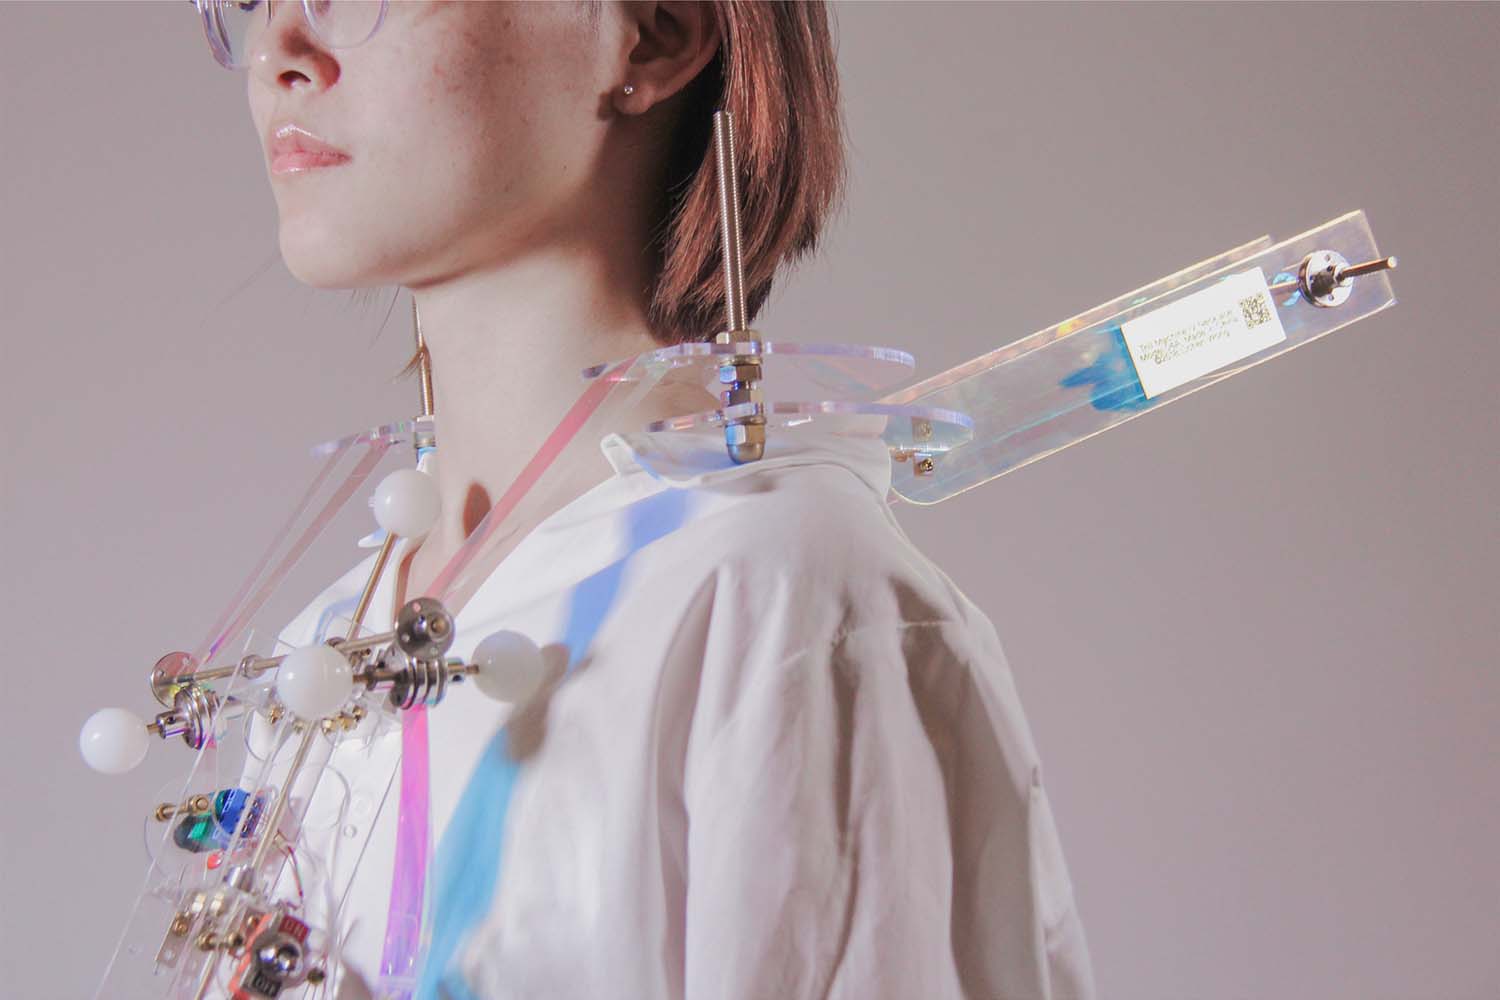 Trill MacHine Voice Processing Device by Lichen Wang, Winner in Arts, Crafts and Ready-Made Design Category, 2018—2019.